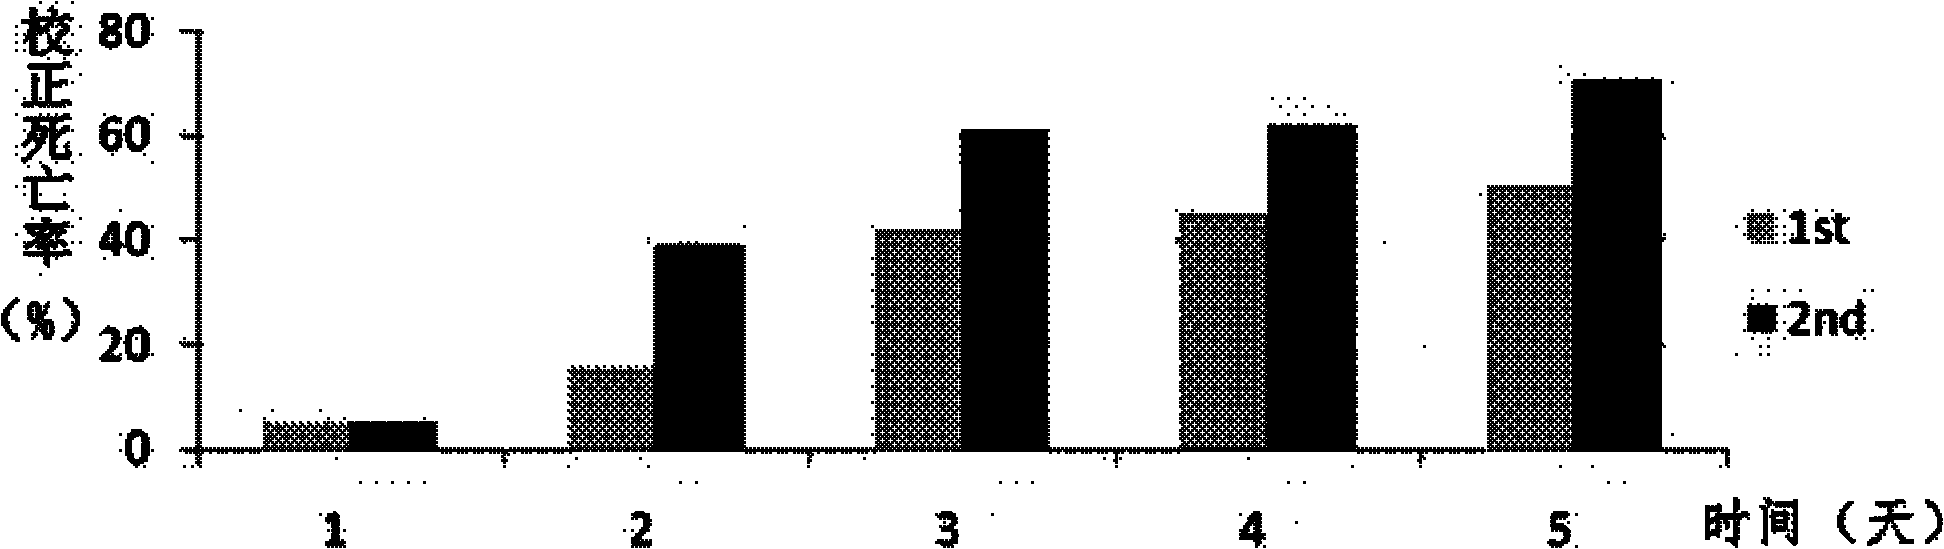 Gene silencing technique based Laodelphax striatellus lethal gene fragment Alpha1-tubulin and dsRNA thereof